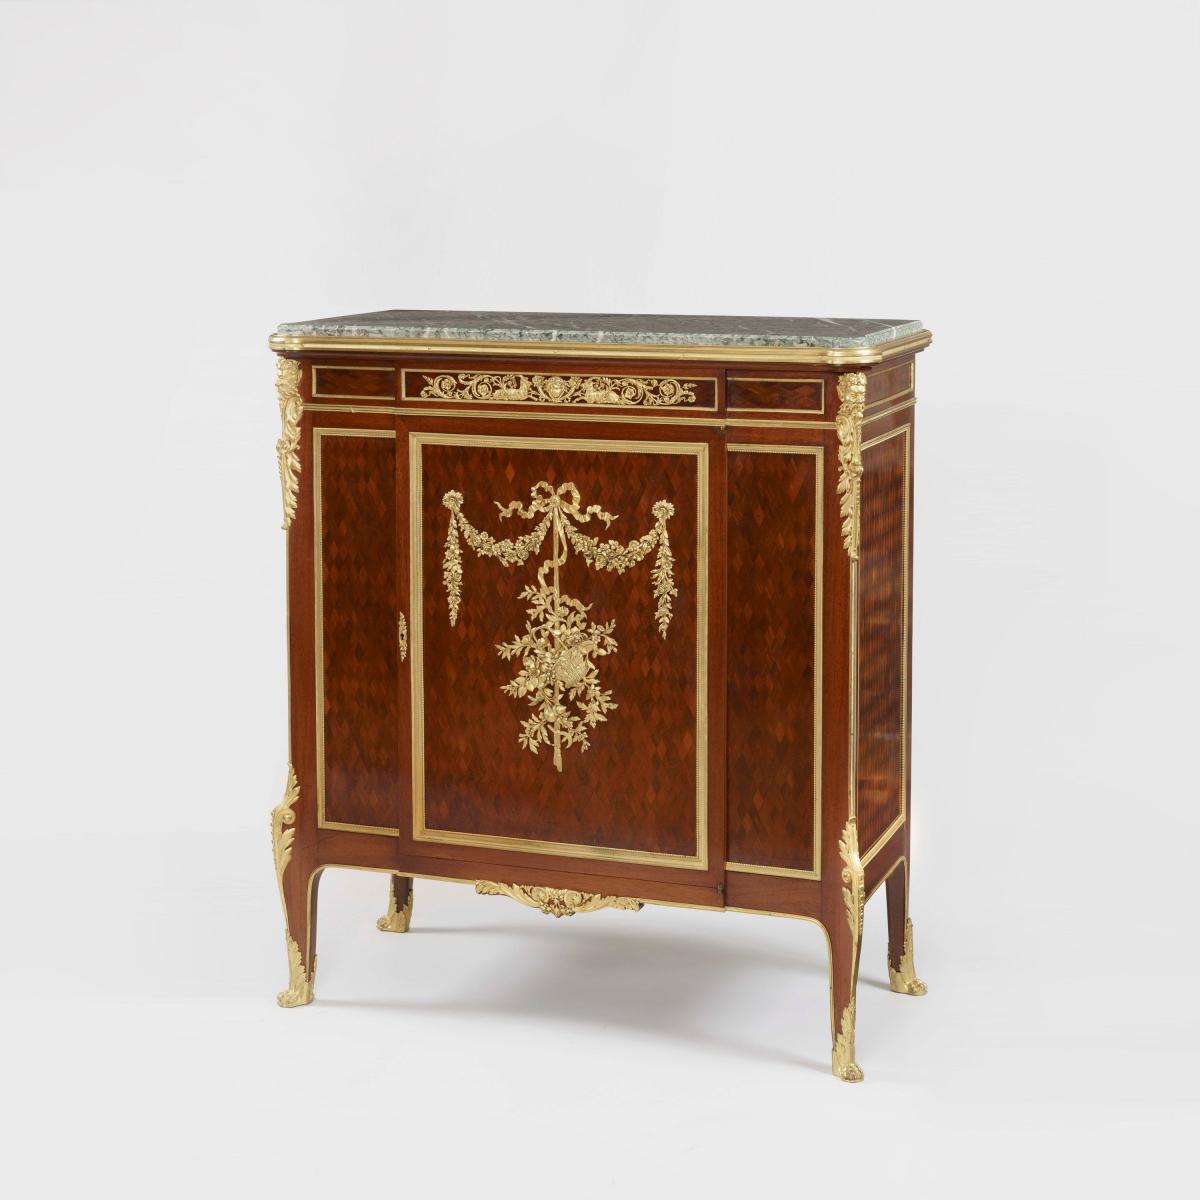 An Ormolu-Mounted Parquetry Cabinet by François Linke